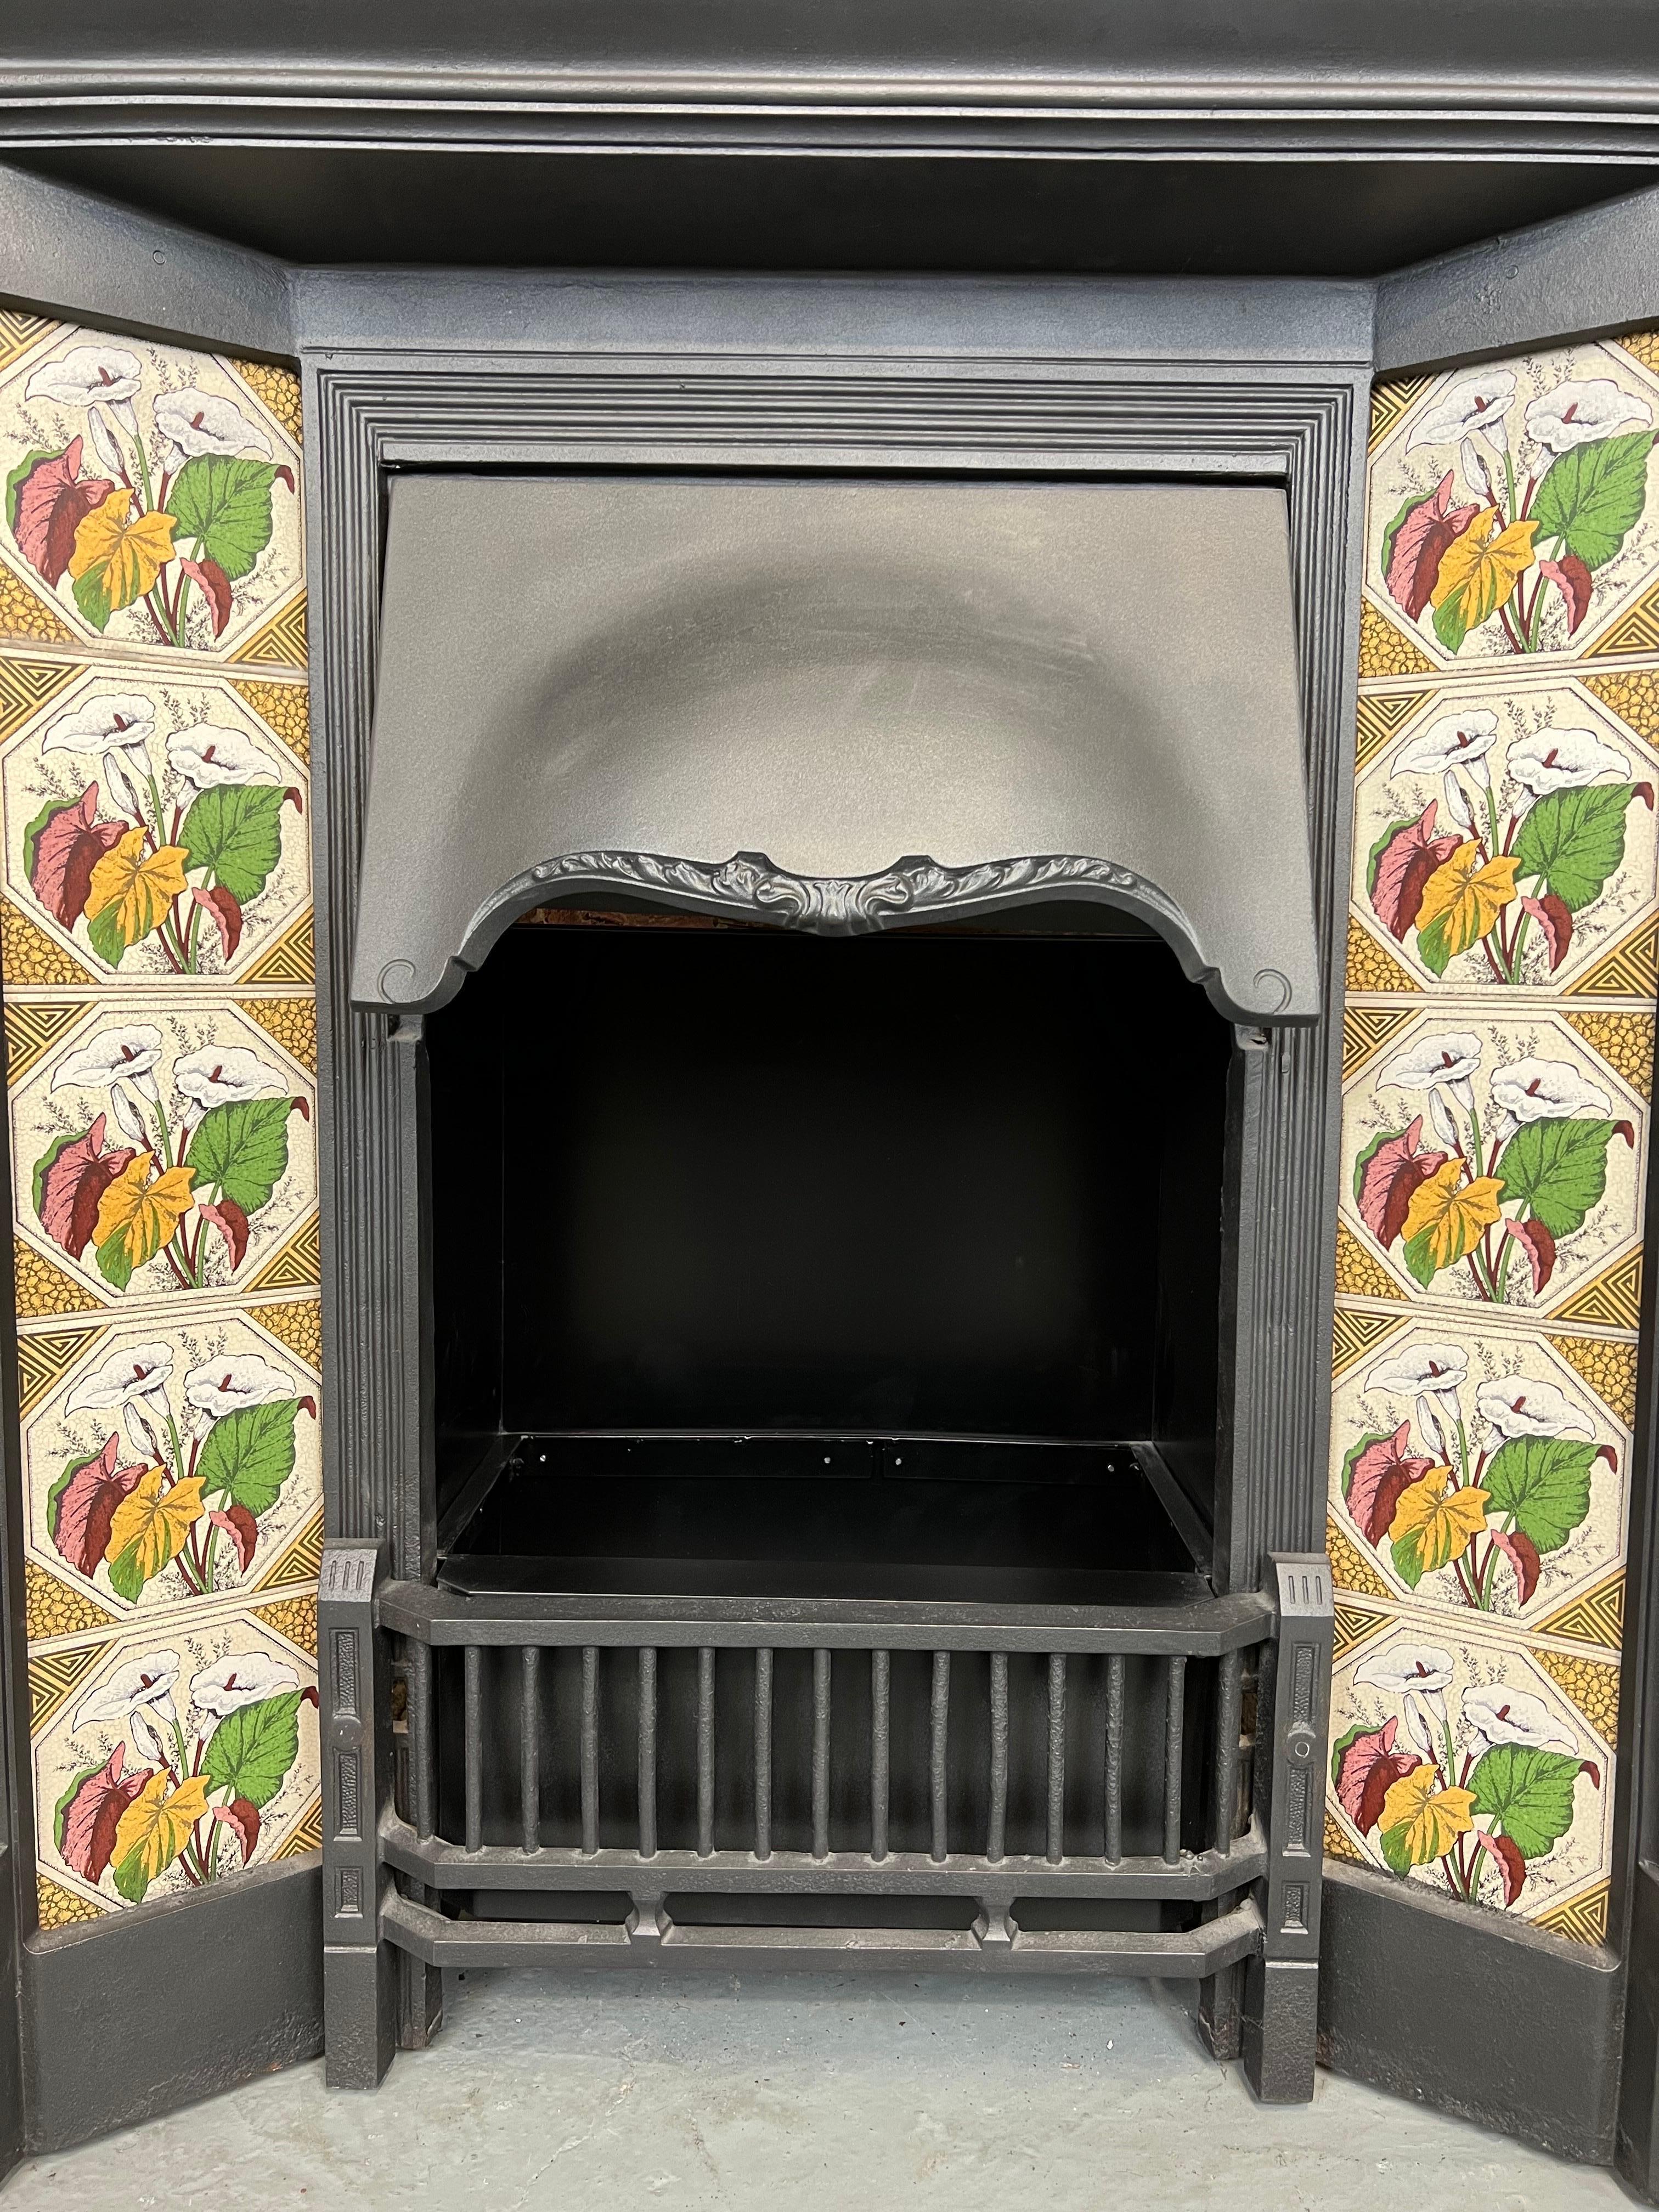 19th Century tiled cast iron fireplace combination.
Traditional blackened iron finish. with set of 10 lily tiles.
Including front bars and adjustable canopy hood.
Recently salvaged from a London town house.

Shelf width 40 inch
Heigth
Shelf